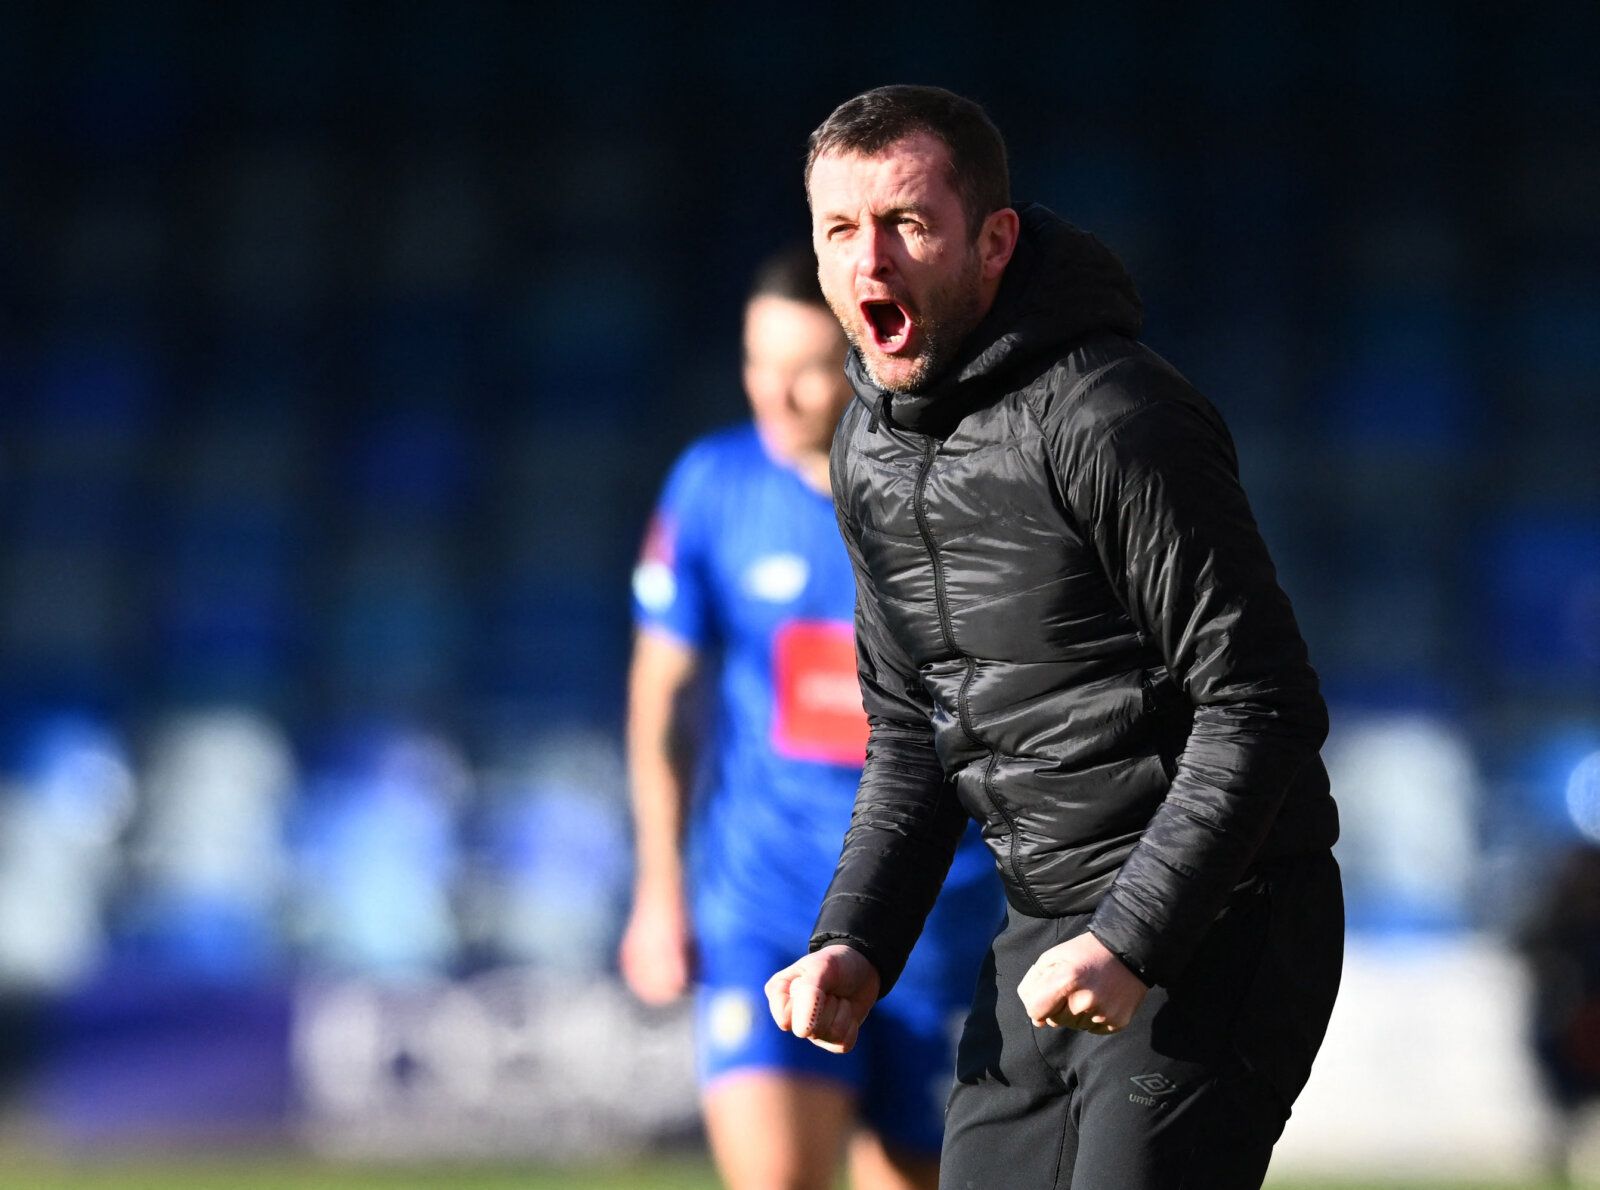 Soccer Football - FA Cup Third Round - Luton Town v Harrogate Town - Kenilworth Road, Luton, Britain - January 9, 2022 Luton Town manager Nathan Jones REUTERS/Dylan Martinez